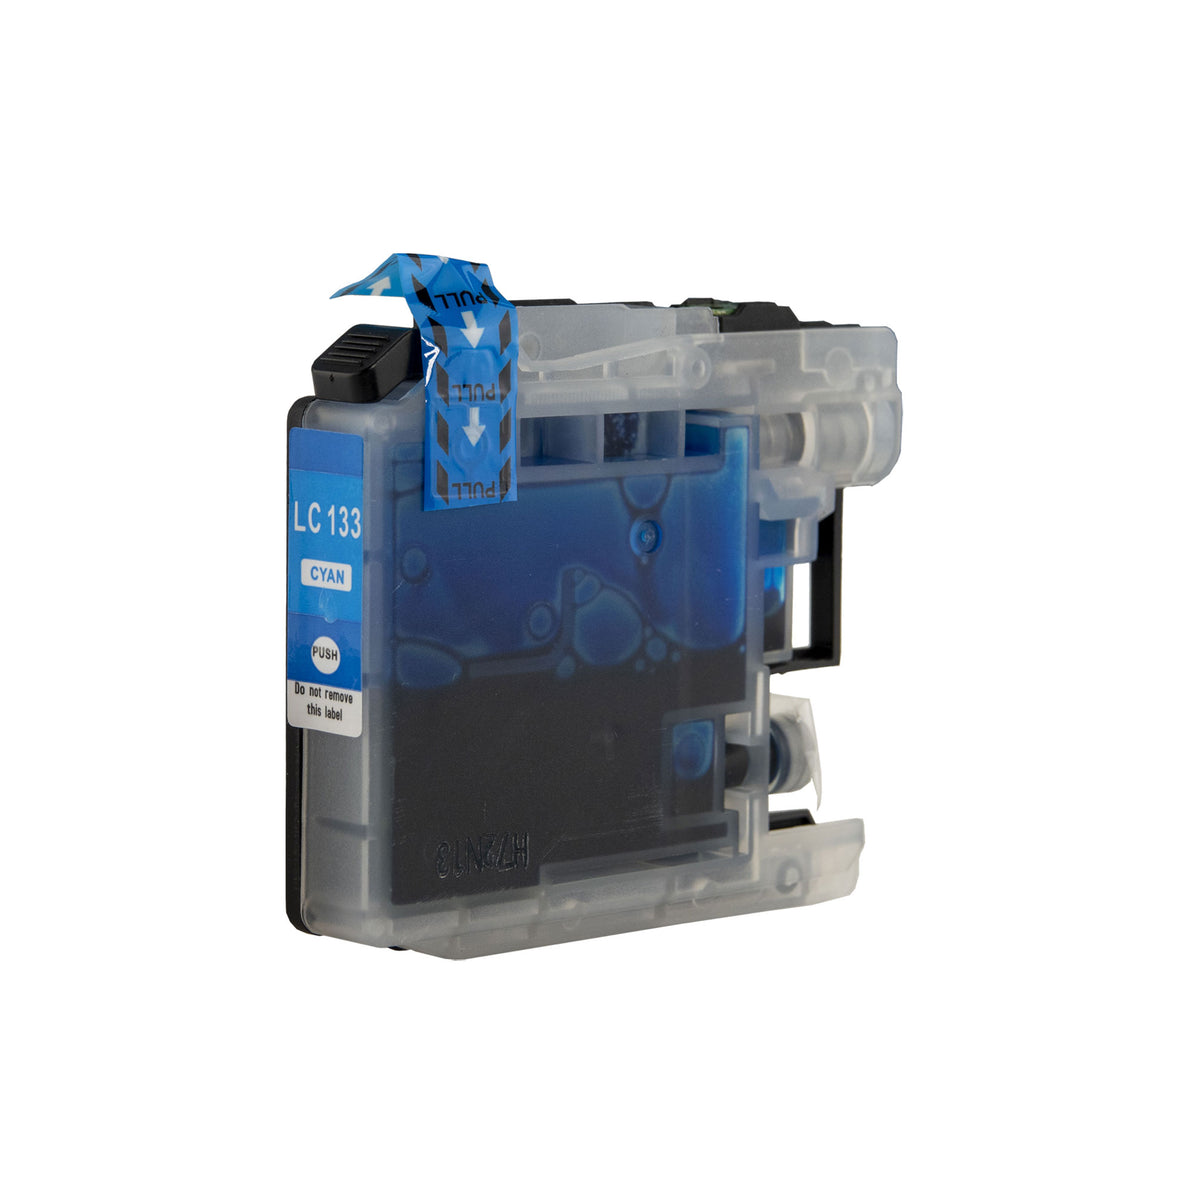 1x Compatible Brother LC-133 Cyan Ink Cartridges